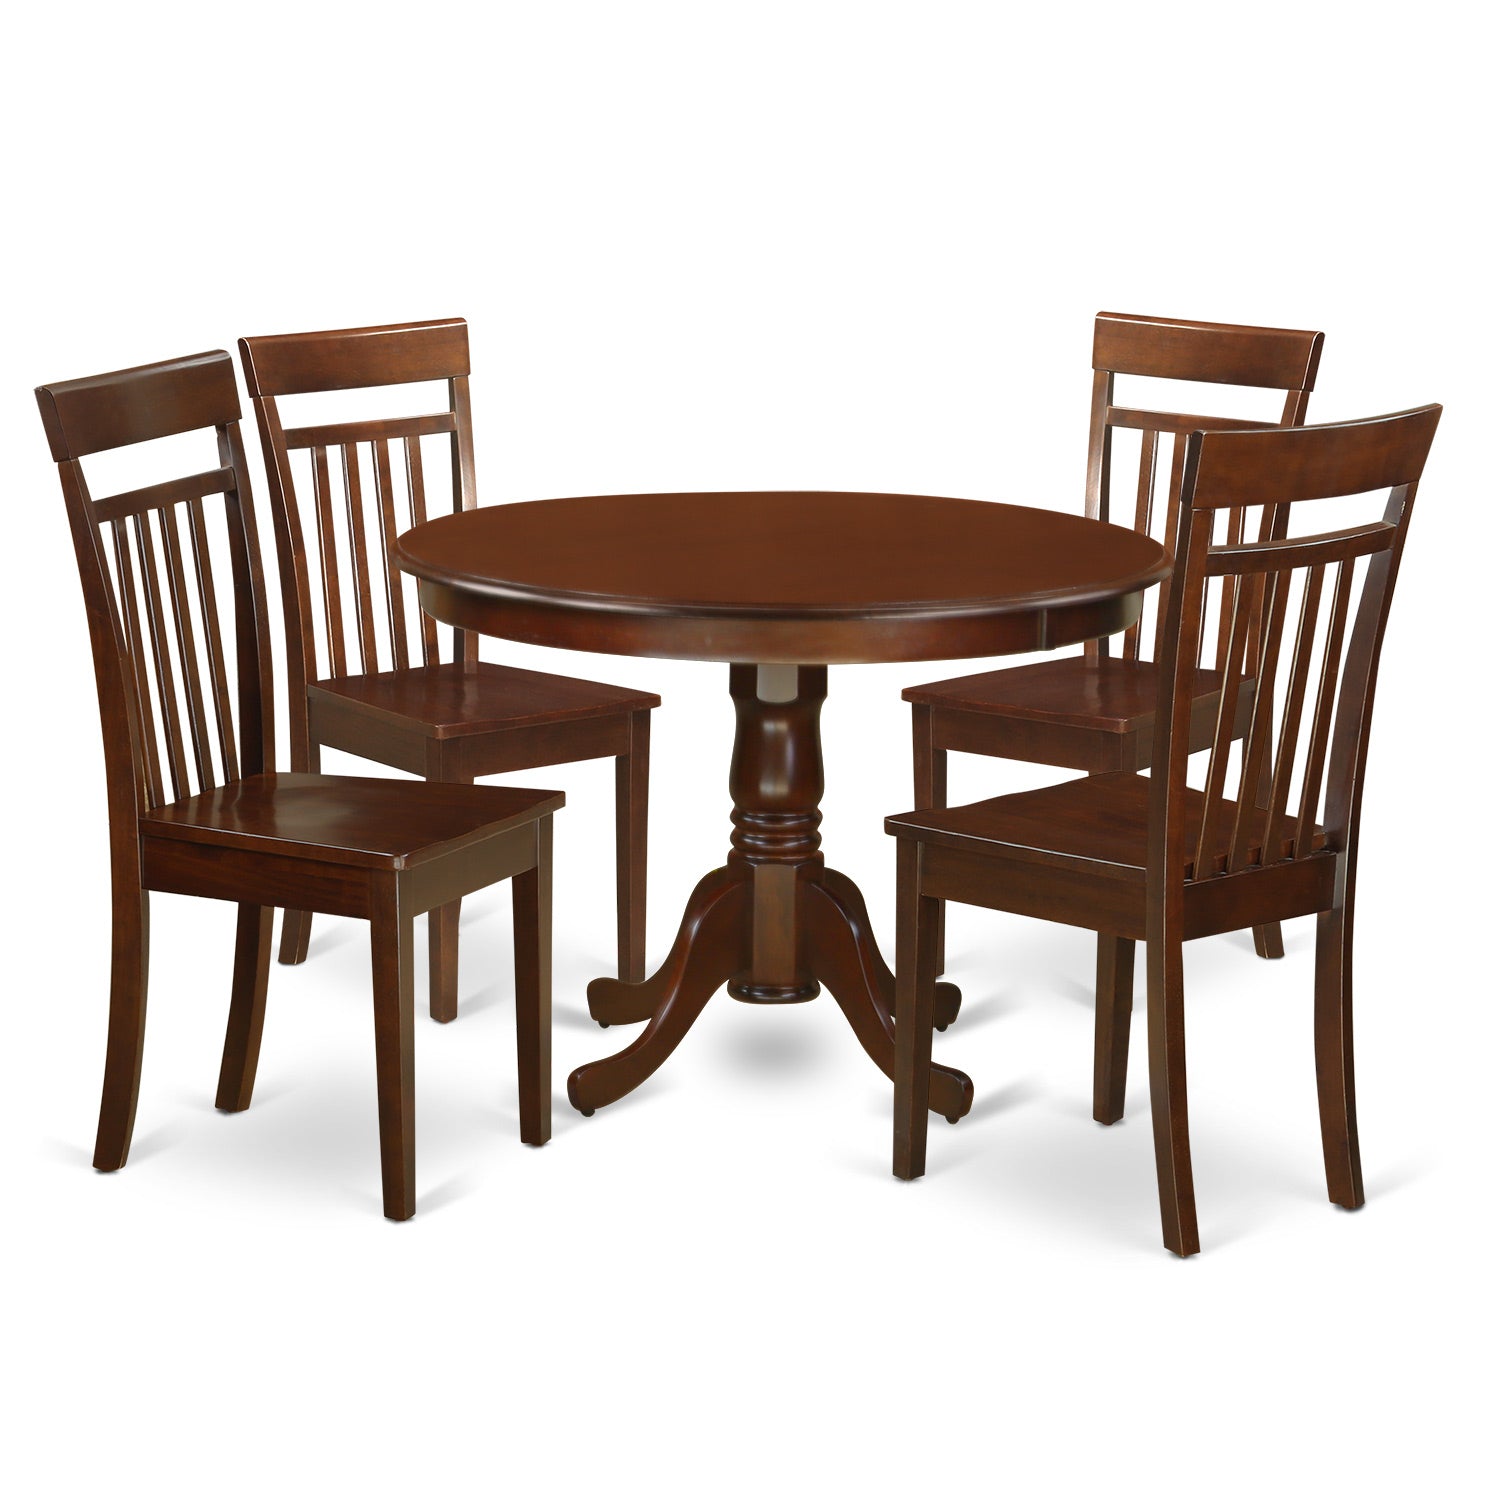 HLCA5-MAH-W 5 Pc set with a Round Small Table and 4 Wood Dinette Chairs in Mahogany